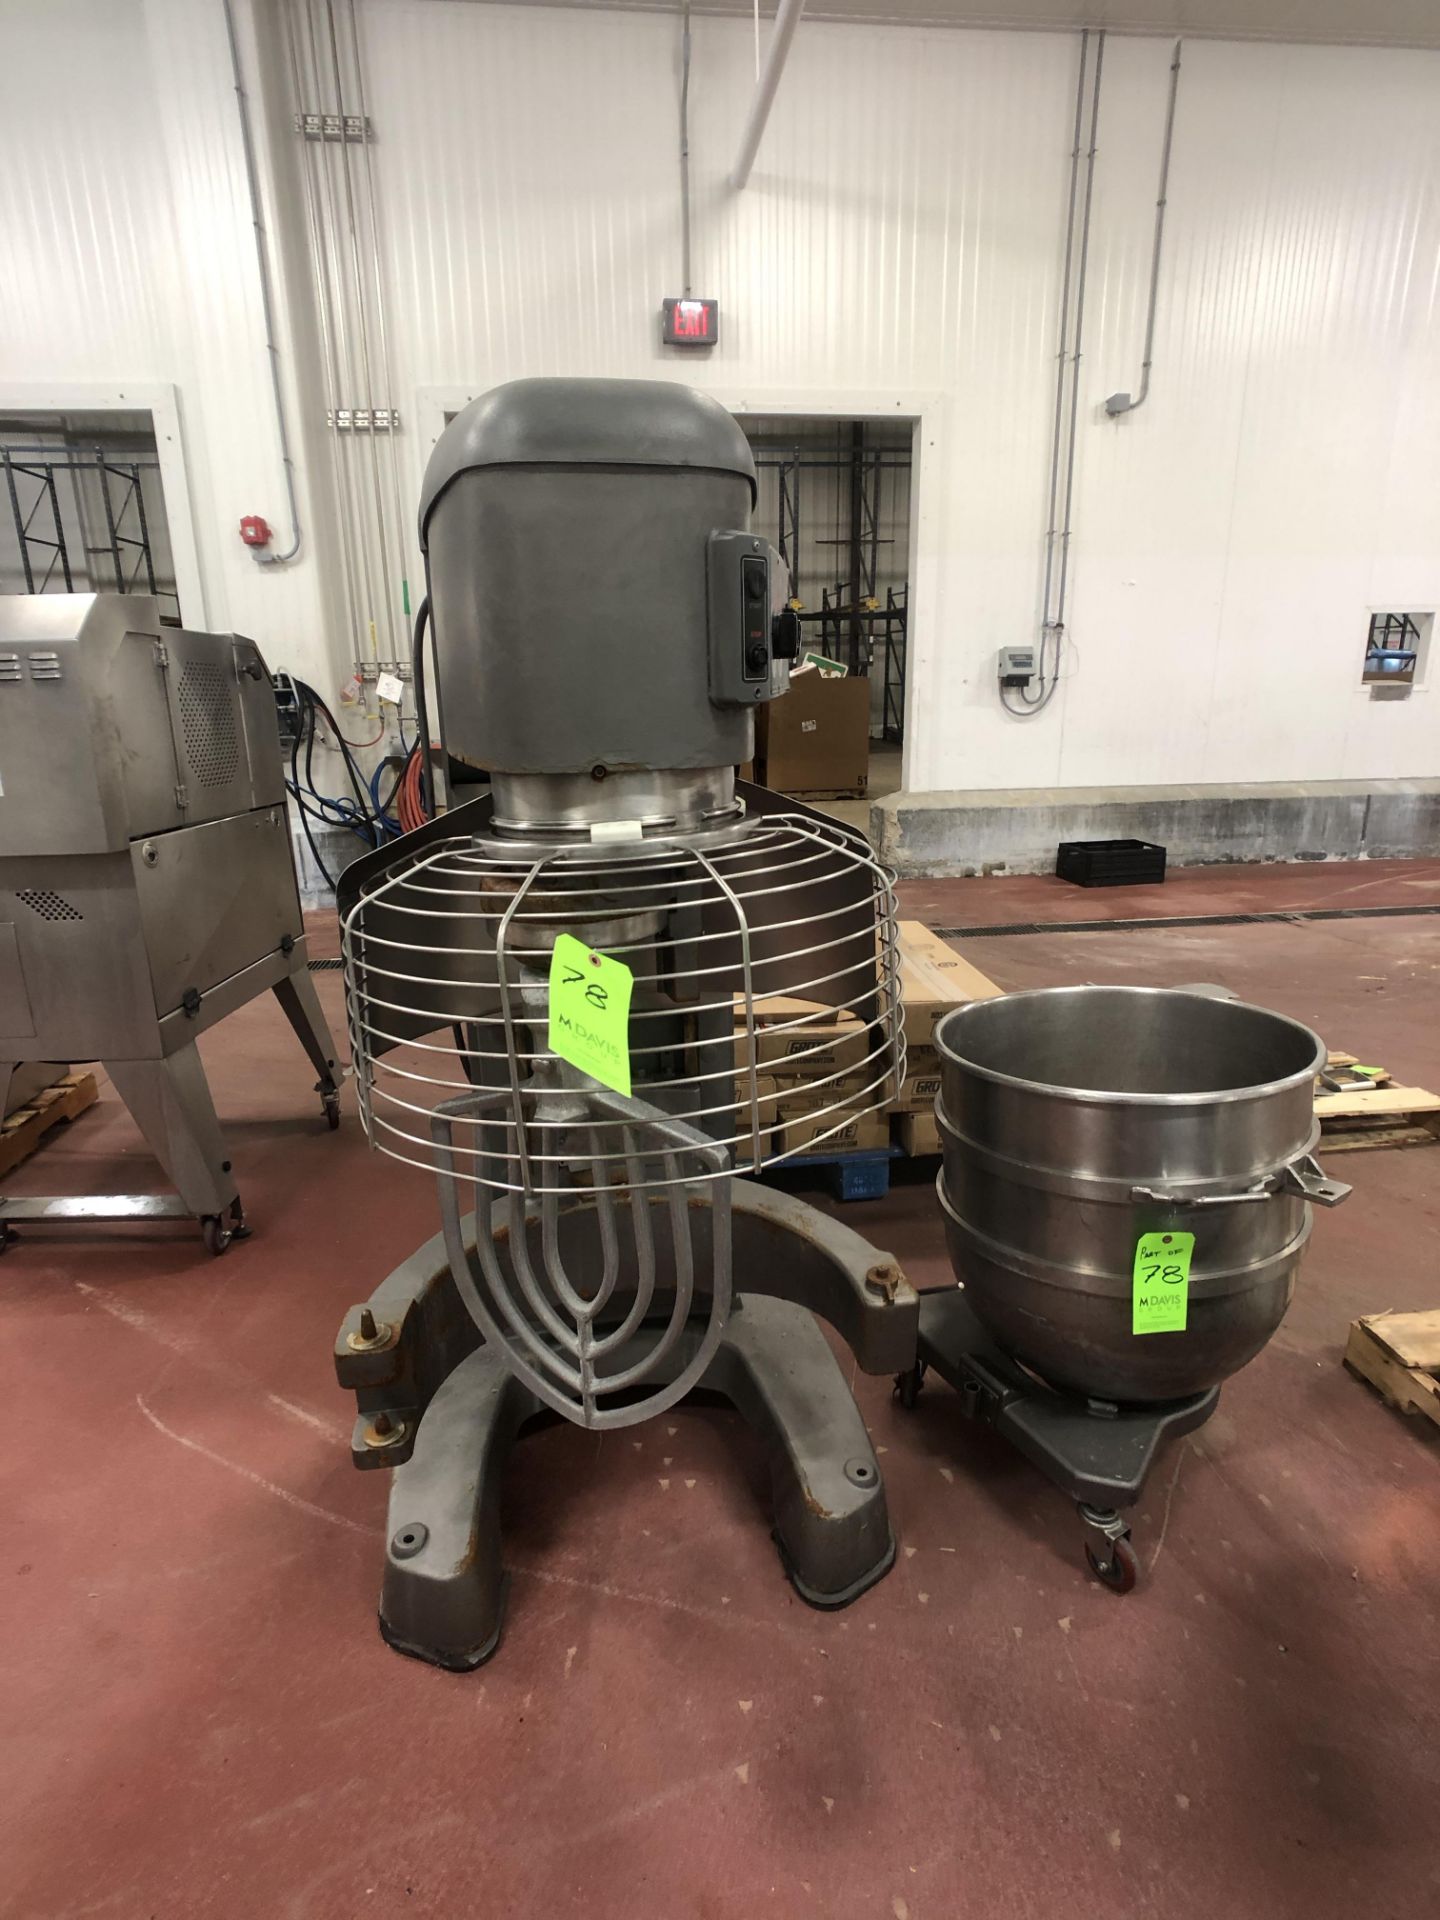 HOBART MIXER MODEL HL 1400, S/N 31-1522 206, INCLUDES BOWL 140 QT AND BEATER ATTACHMENTS